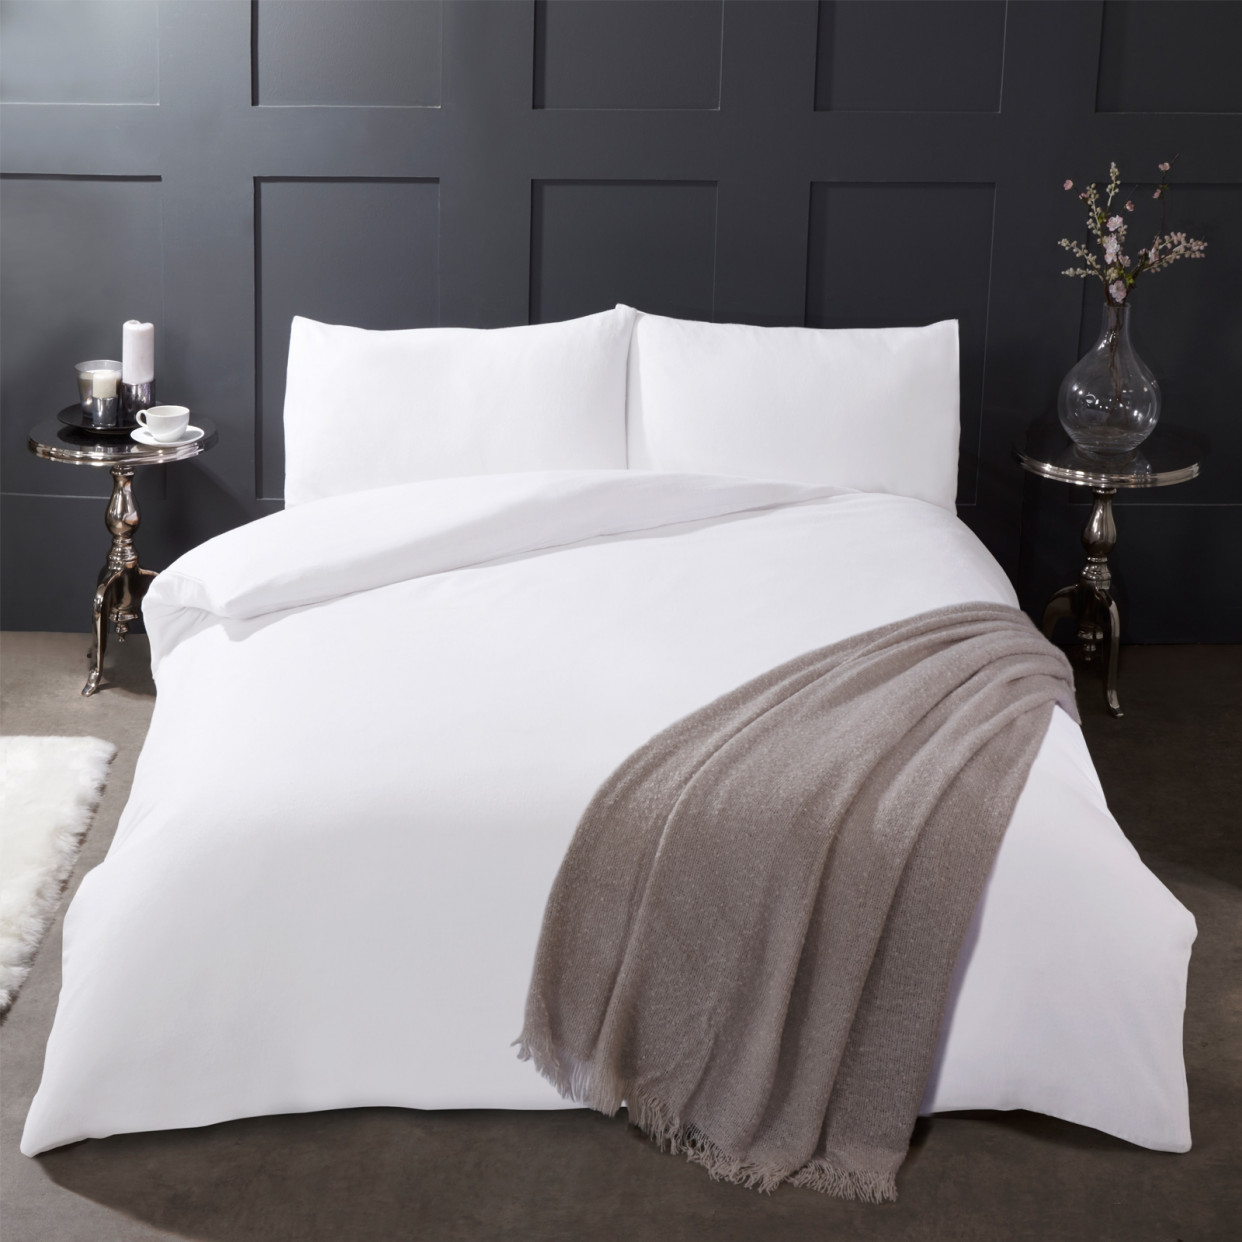 Highams 100% Brushed Cotton Duvet Cover with Pillowcase Plain Flannelette Thermal Bedding Set, Pure White - King>